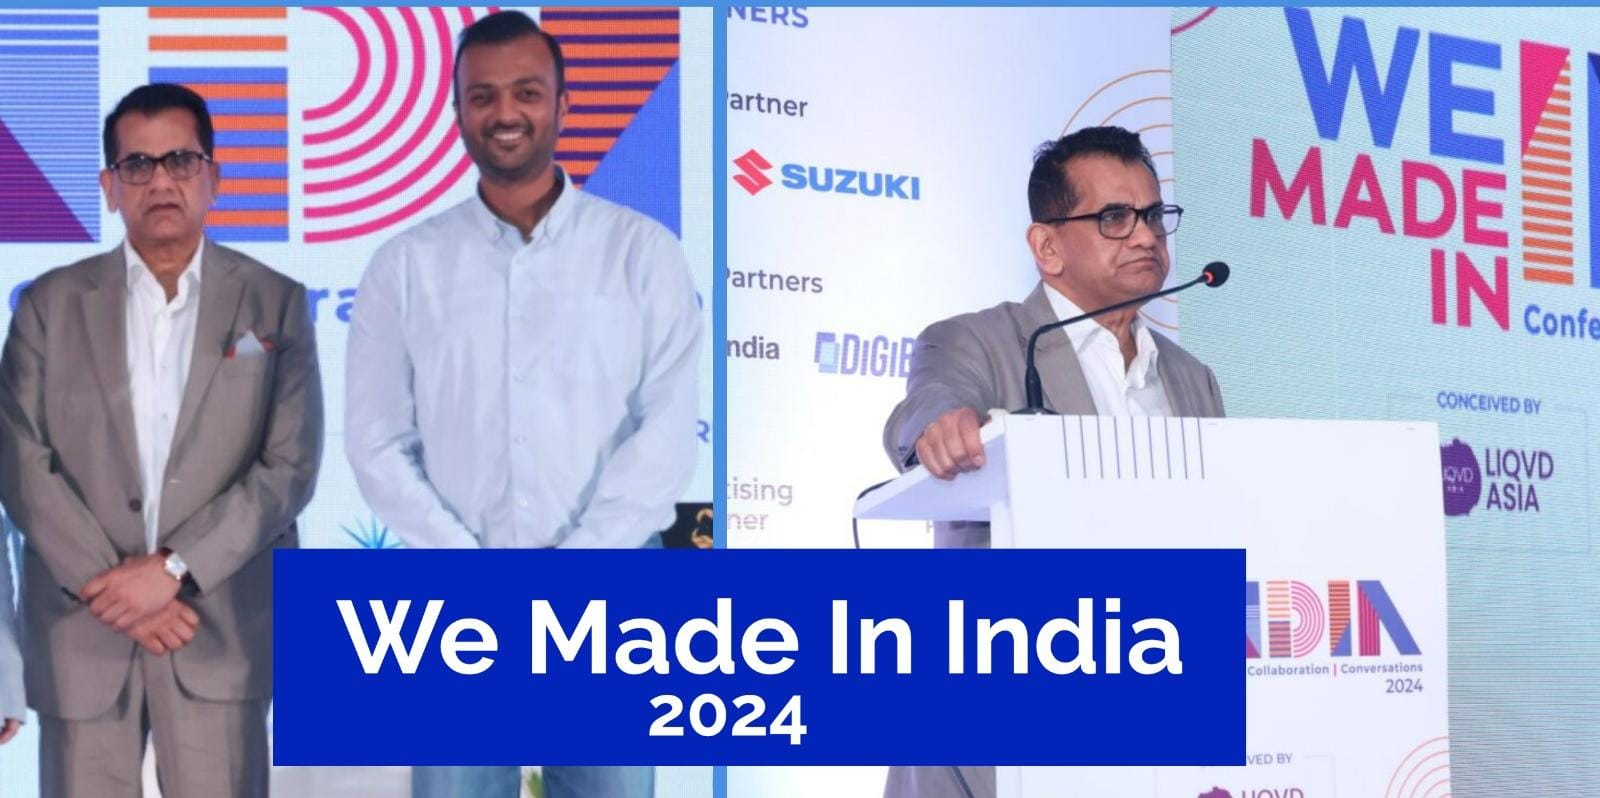 ‘We Made in India – 2024’ brings to focus India’s entrepreneurship growth and economic progress over the last decade